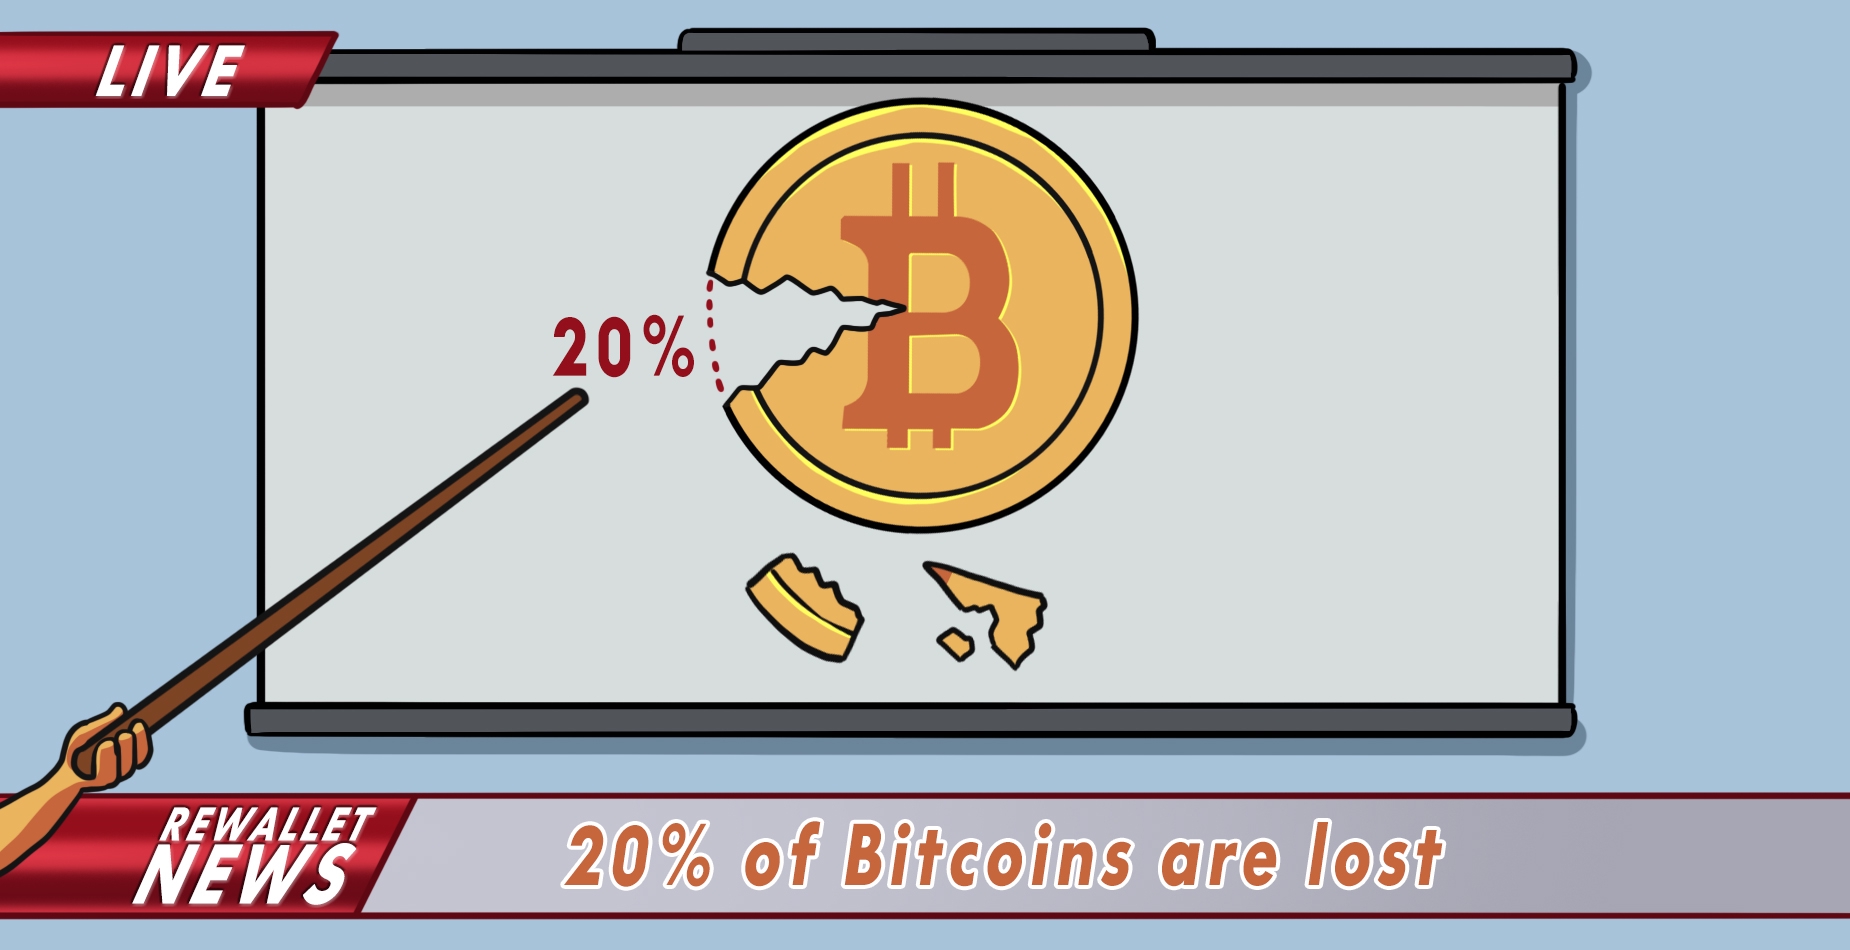 Here's How Many Bitcoins Are Now Lost Forever: IntoTheBlock